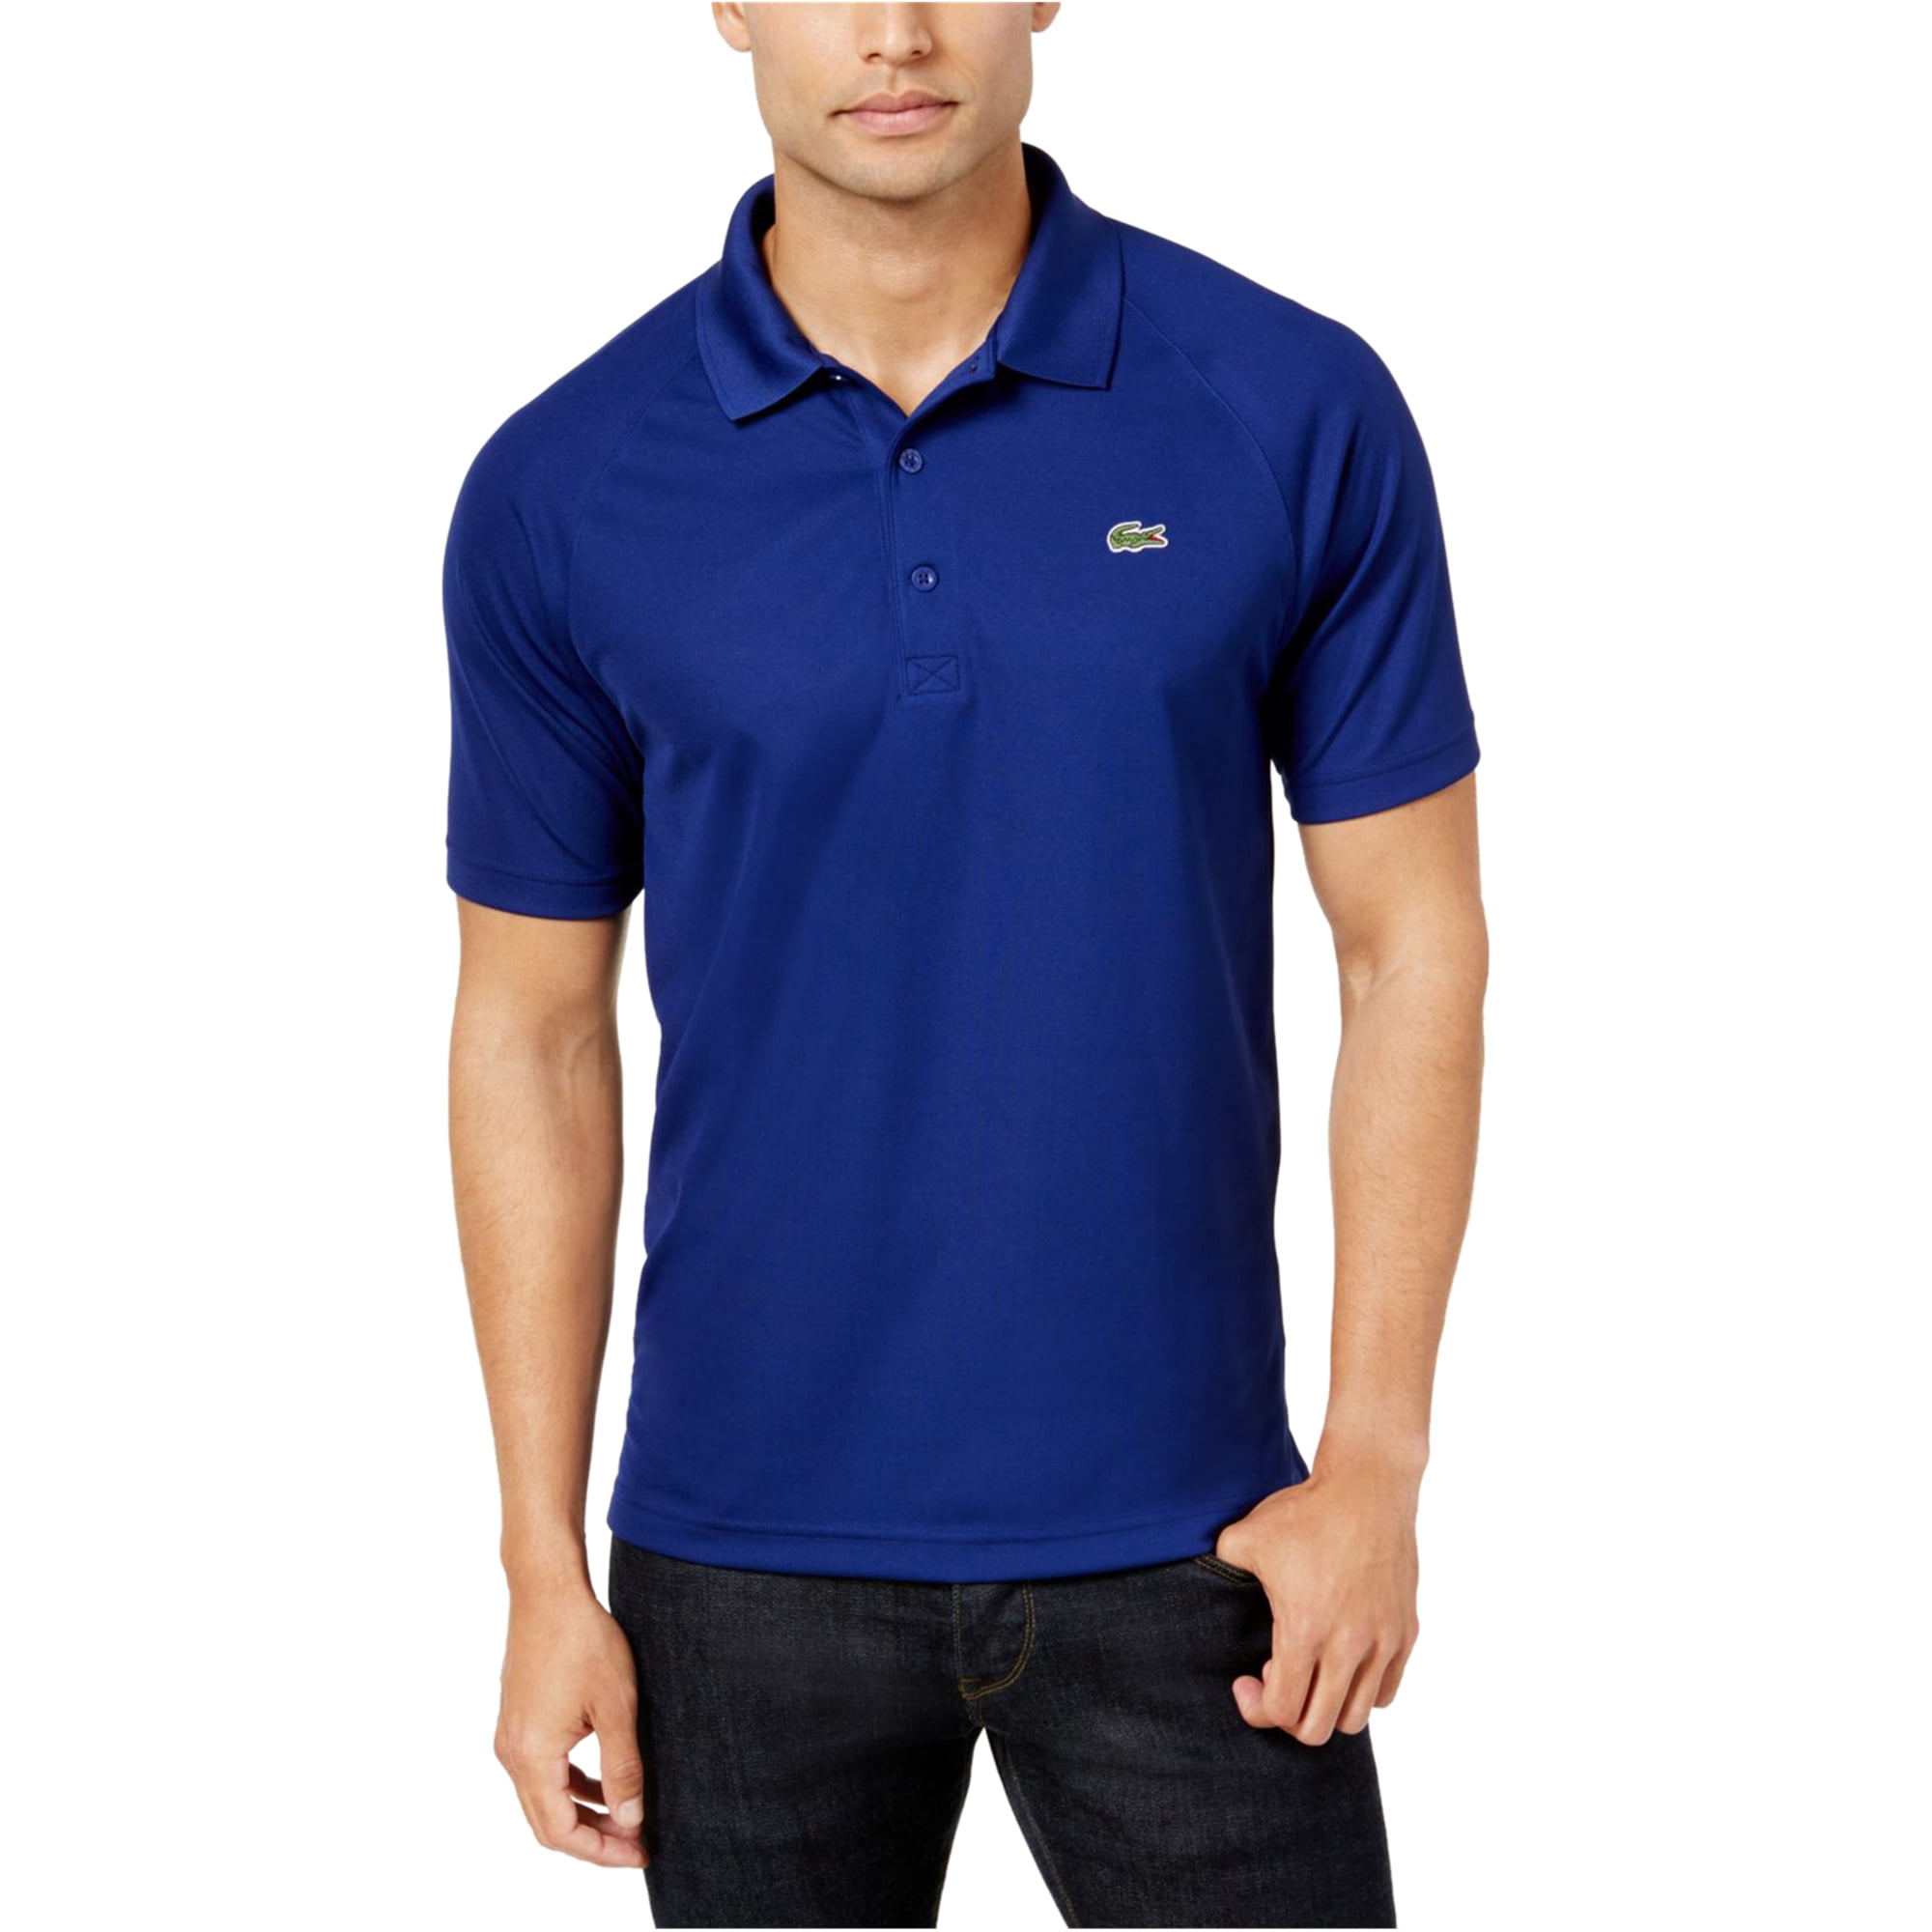 Lacoste - Lacoste Mens Performance Rugby Polo Shirt, Blue, Large ...